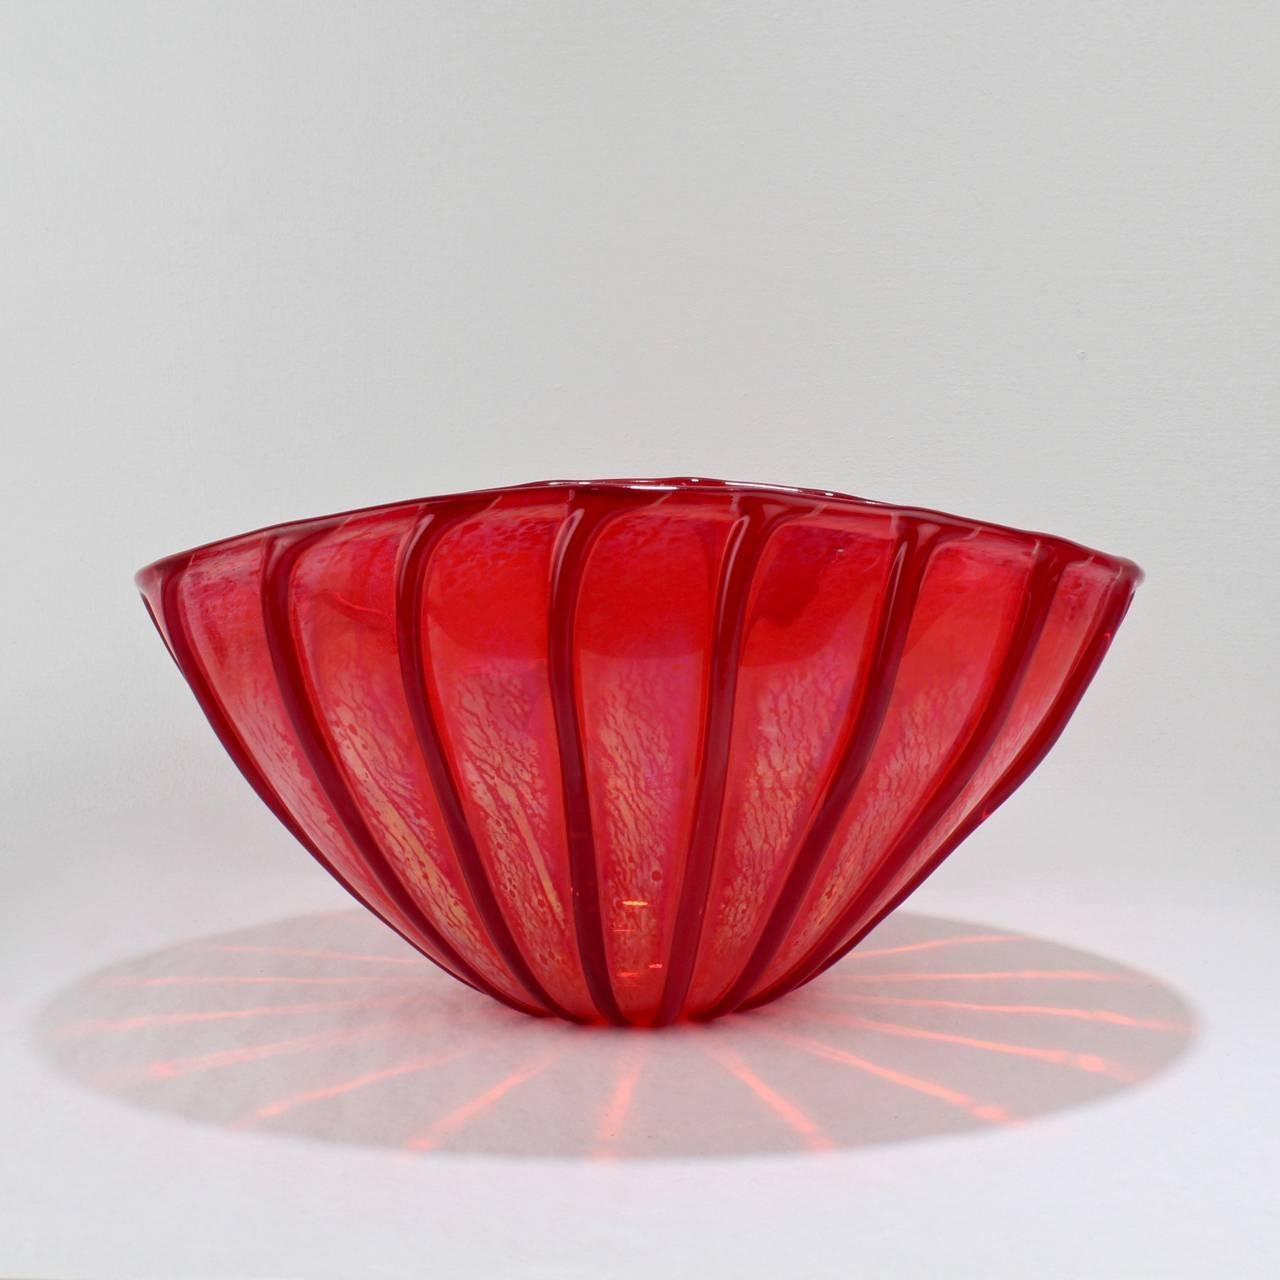 Art Deco Seguso Viro Limited Edition Nuance Collection Red Murano Glass Vase or Bowl